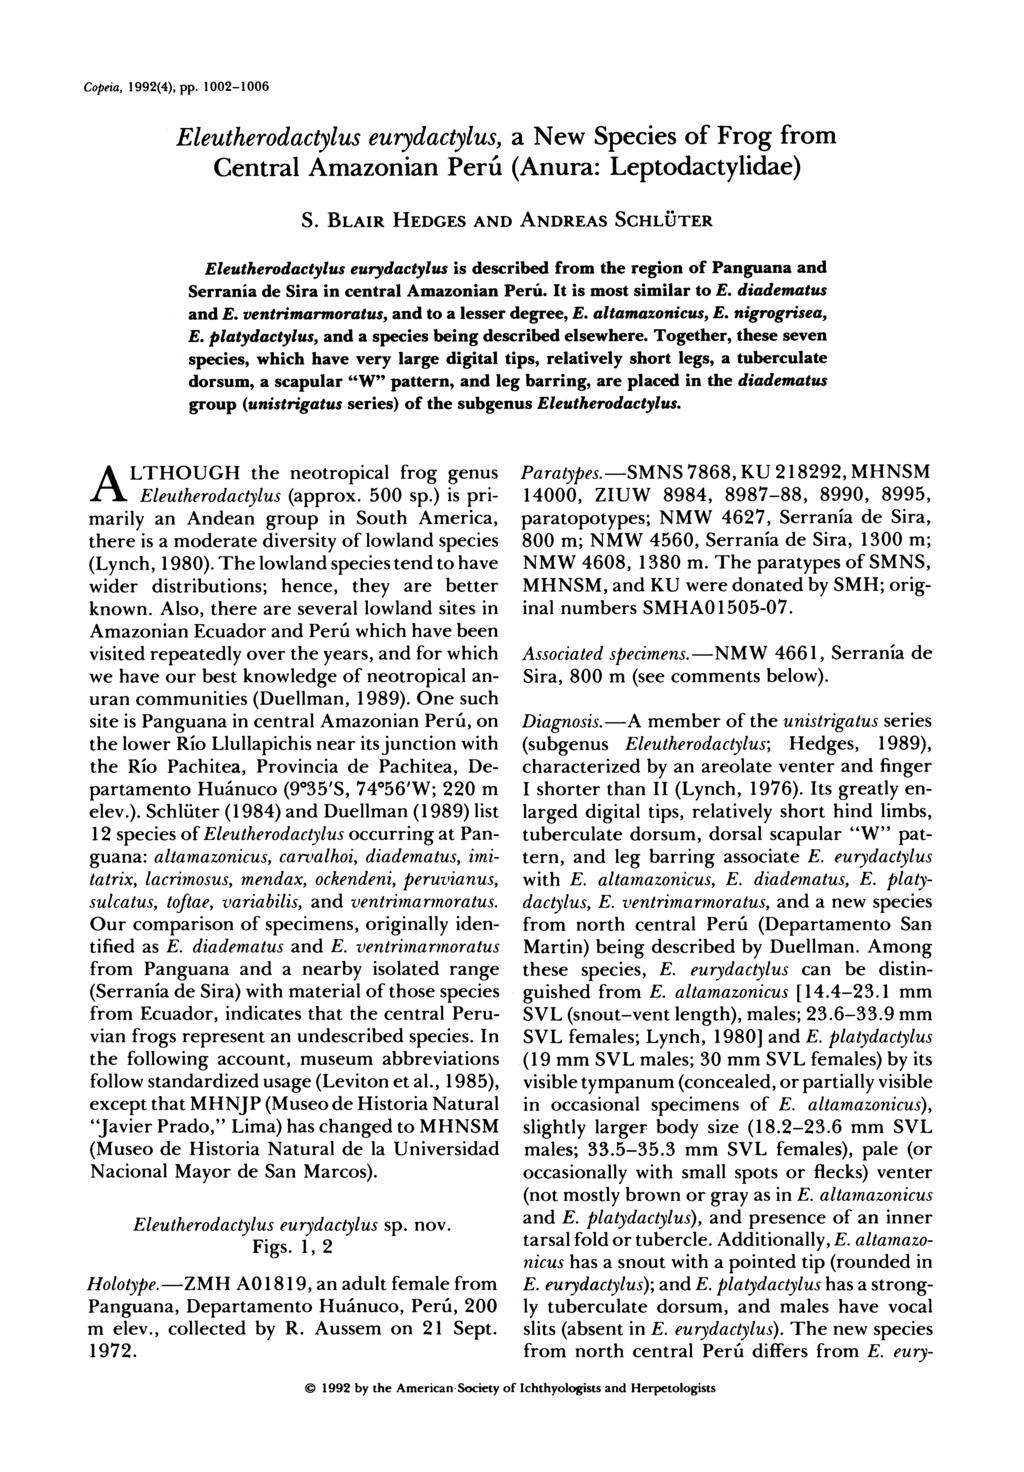 Copeia, 1992(4); pp. 1002-1006 Eleutherodactylus eurydactylus, a New Species of Frog from Central Amazonian Peru (Anura: Leptodactylidae) S.